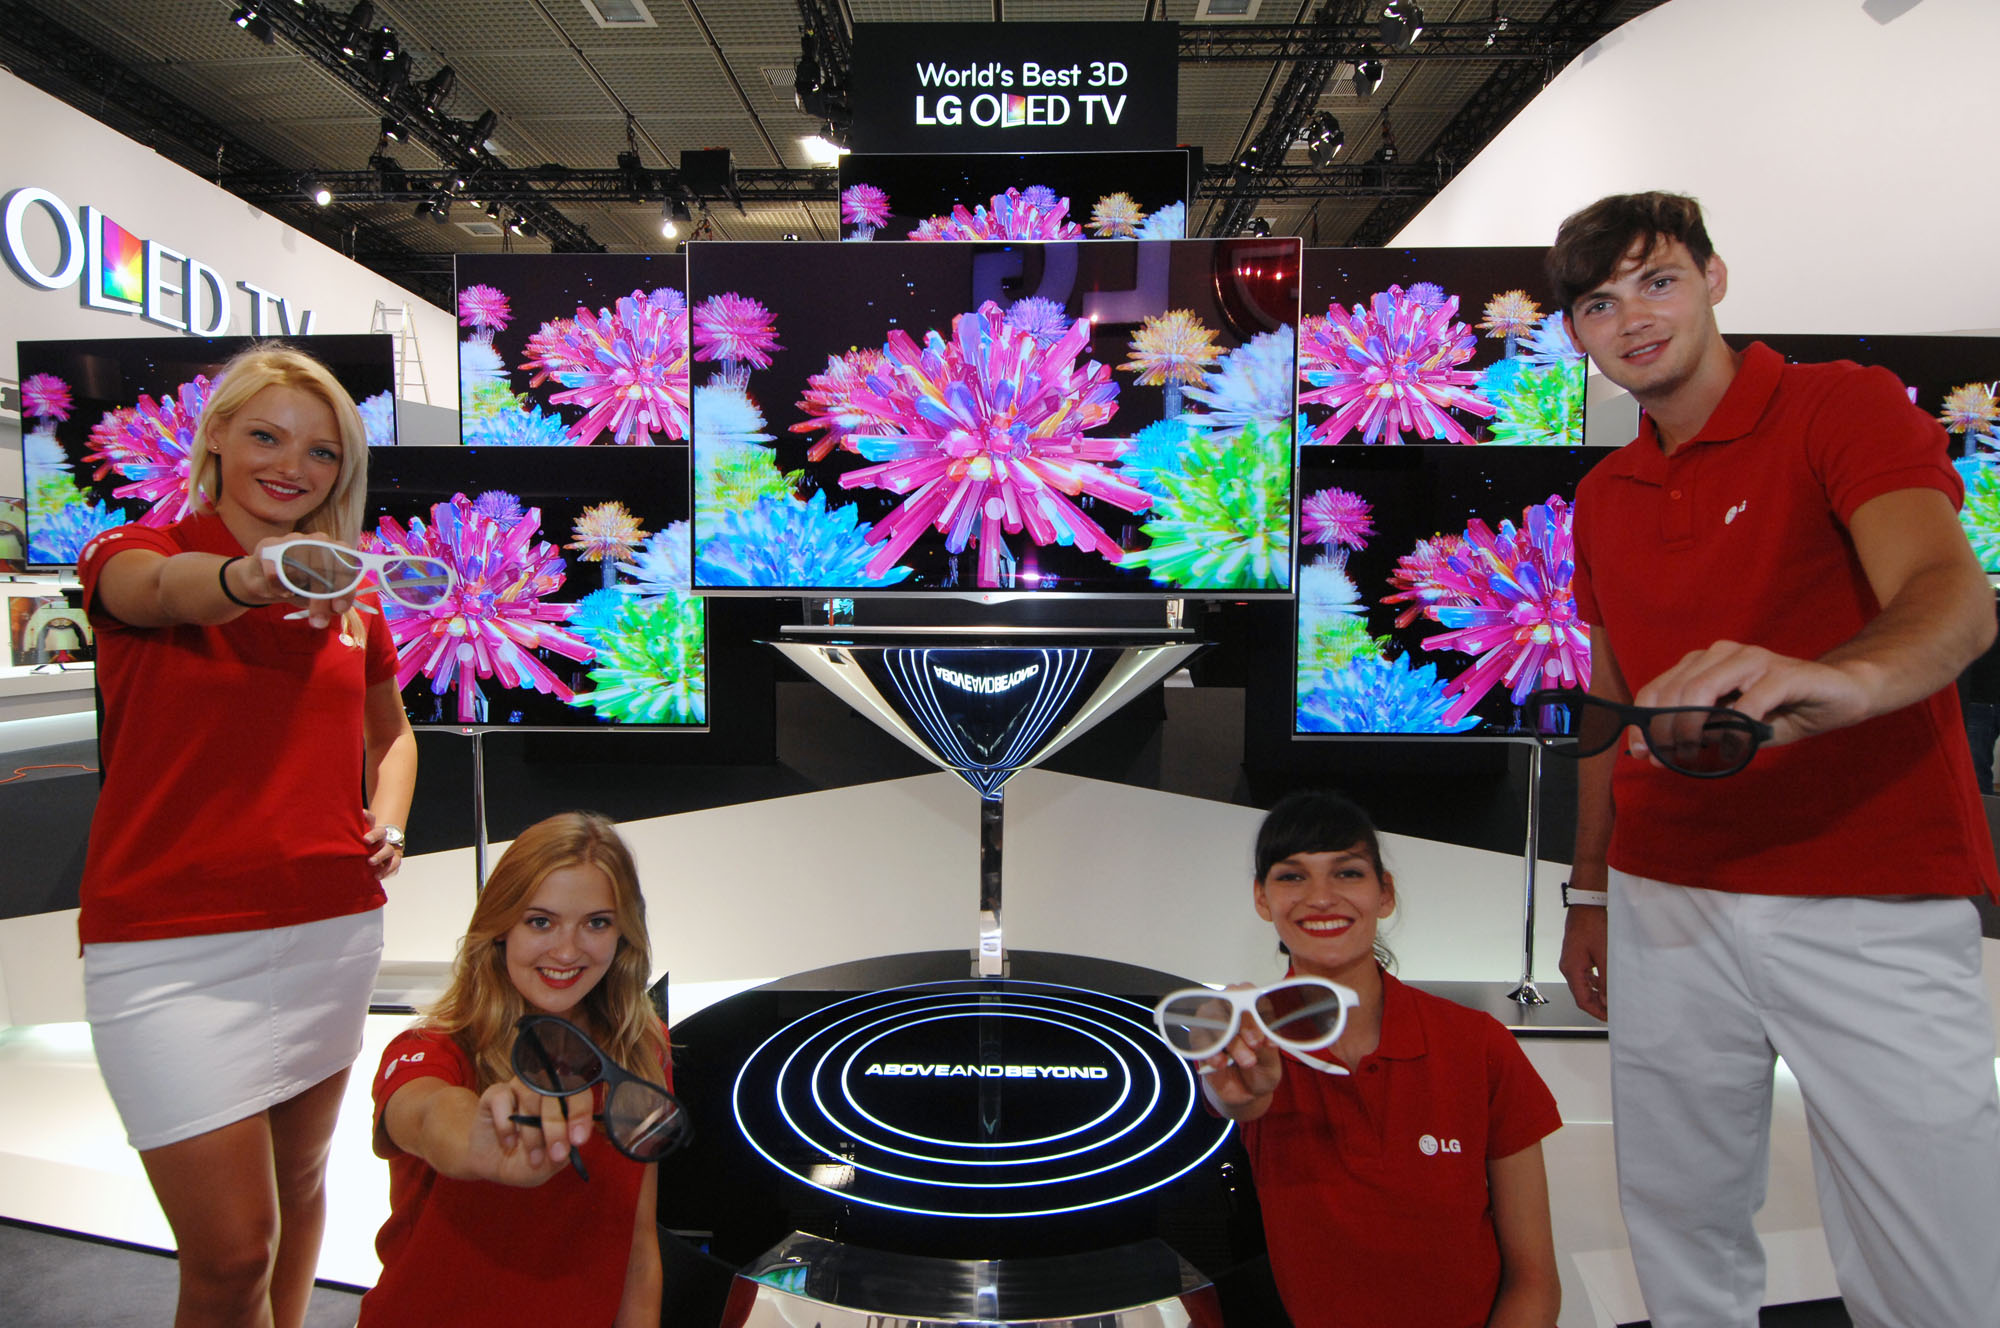 LG booth staff holding 3D glasses while presenting LG’s 3D OLED TVs at IFA 2012